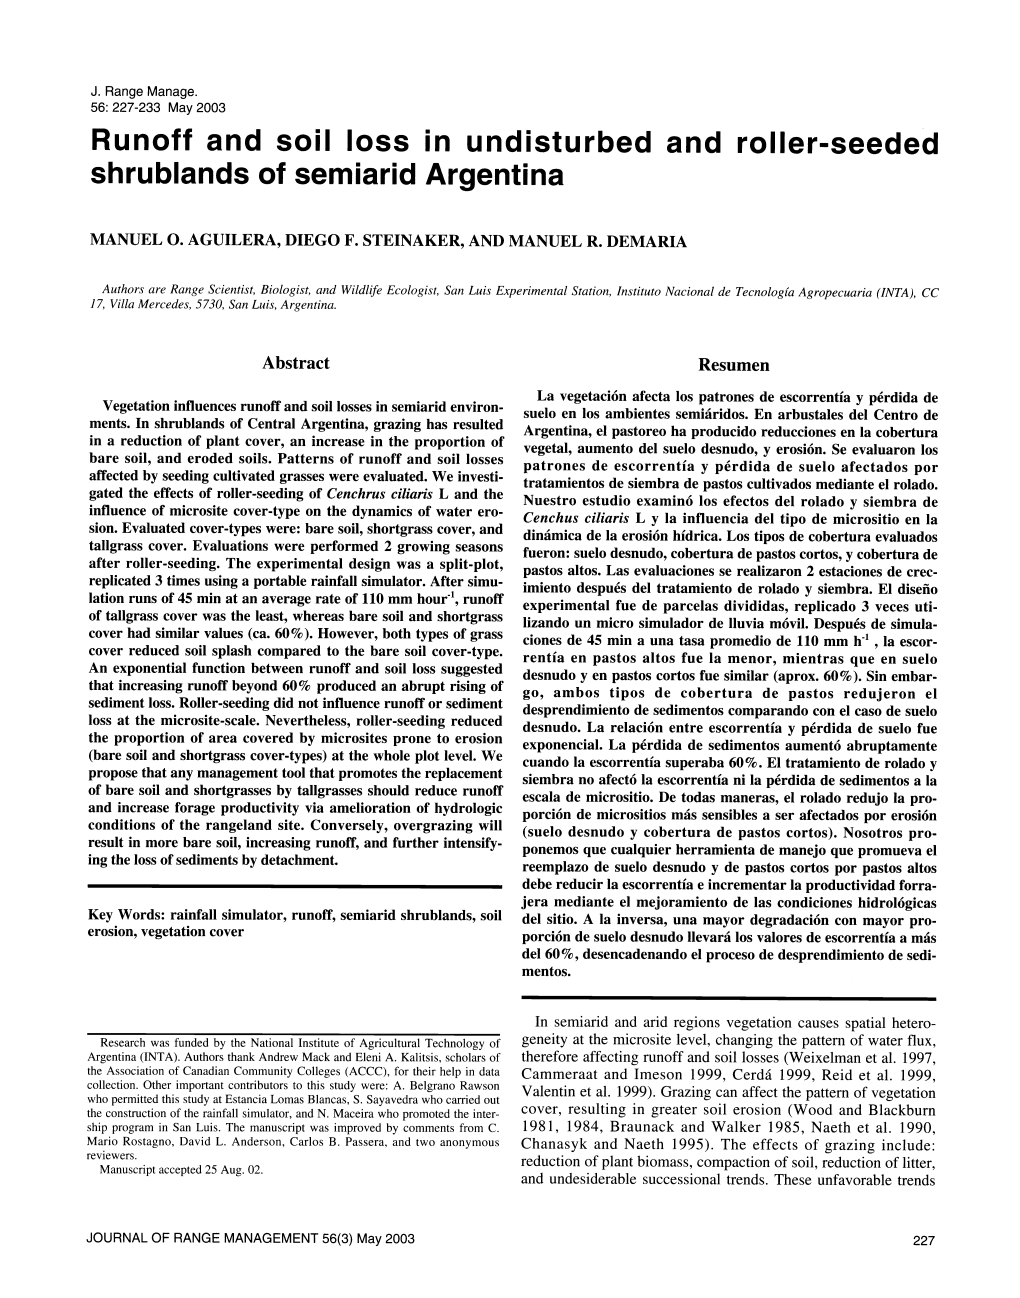 Runoff and Soil Loss in Undisturbed and Roller-Seeded Shrublands of Semiarid Argentina